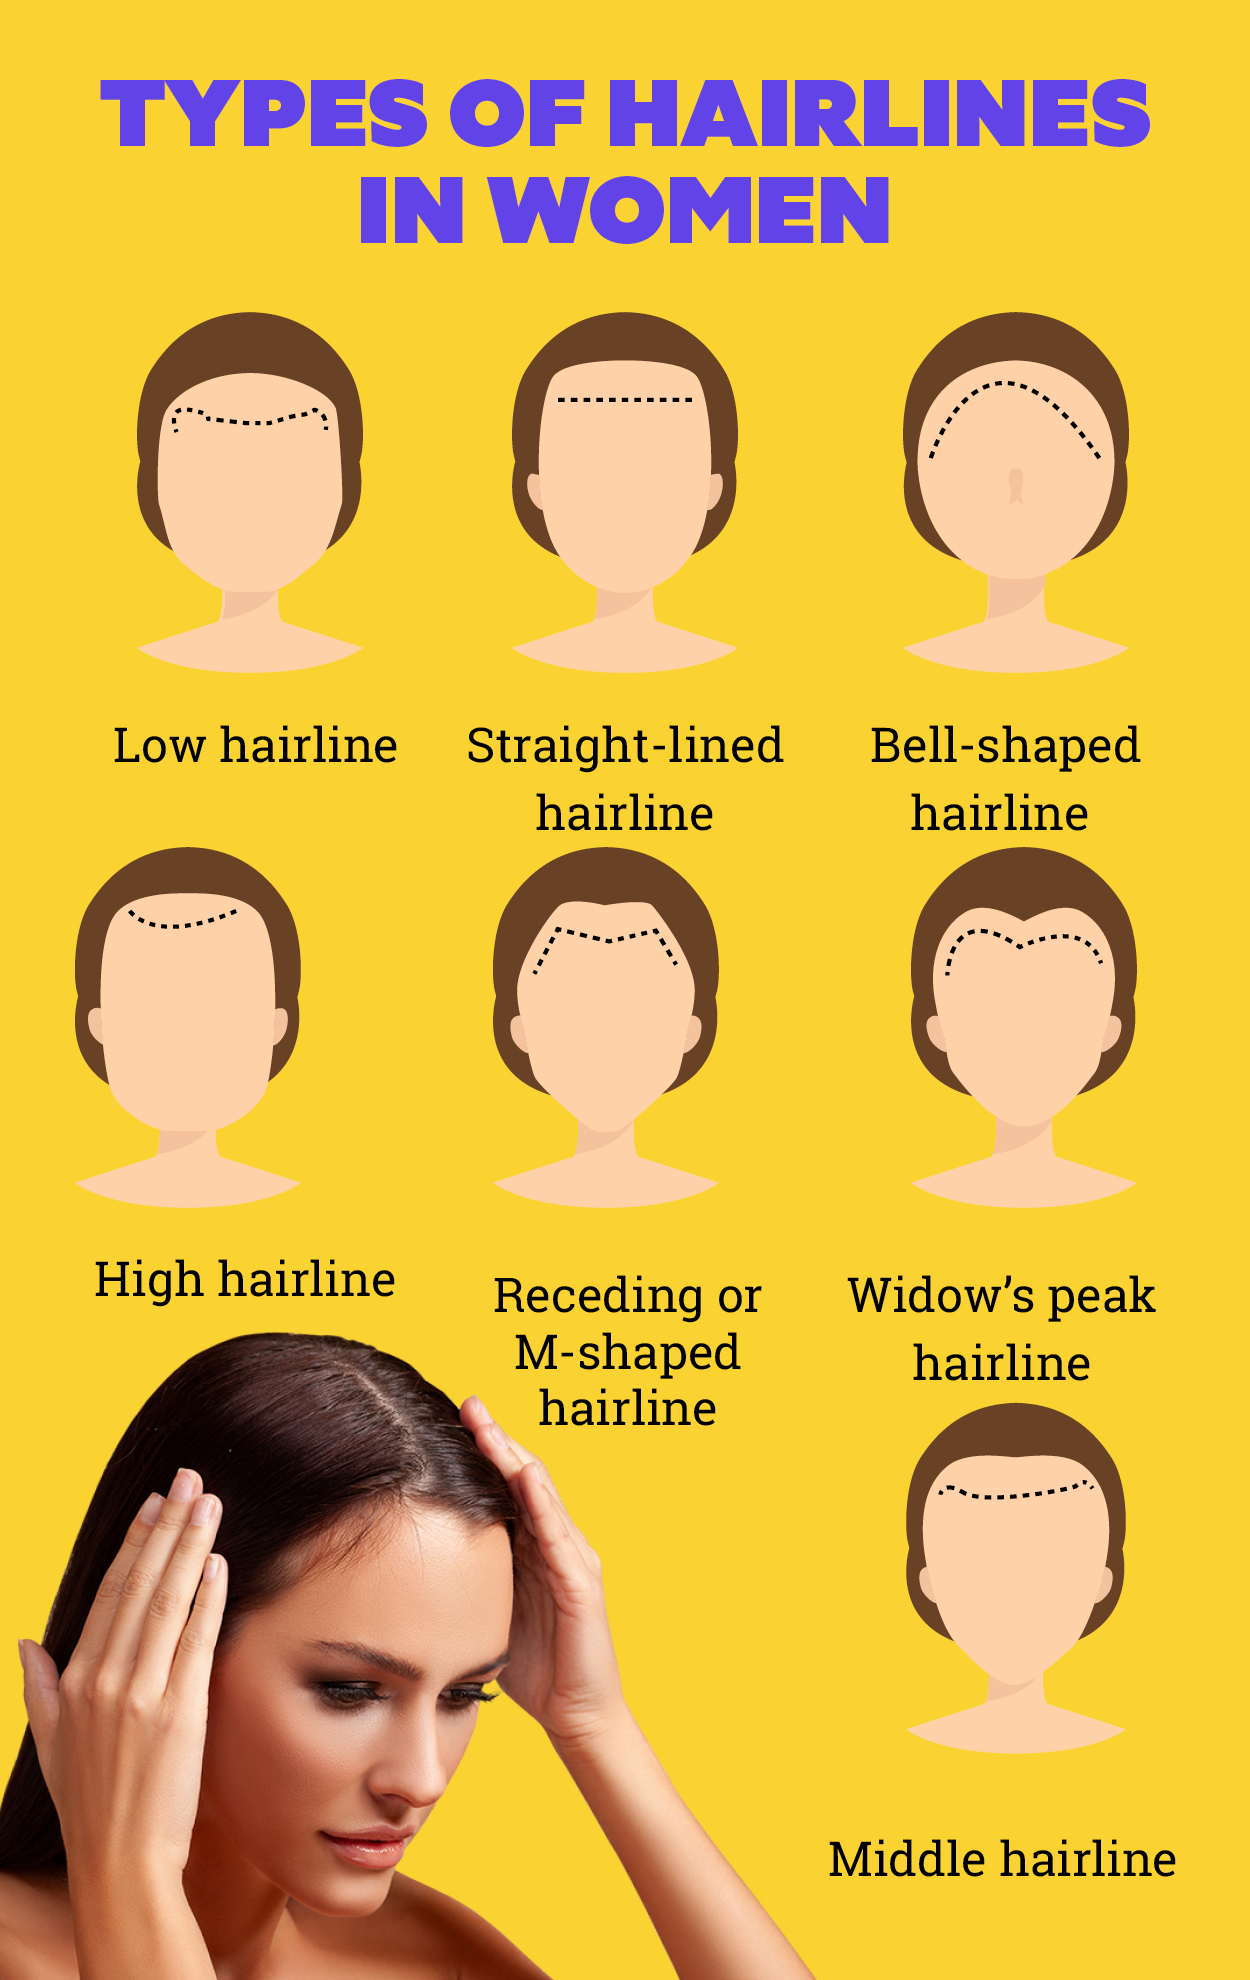 7 types of hairlines and tips to take care of them 1 0